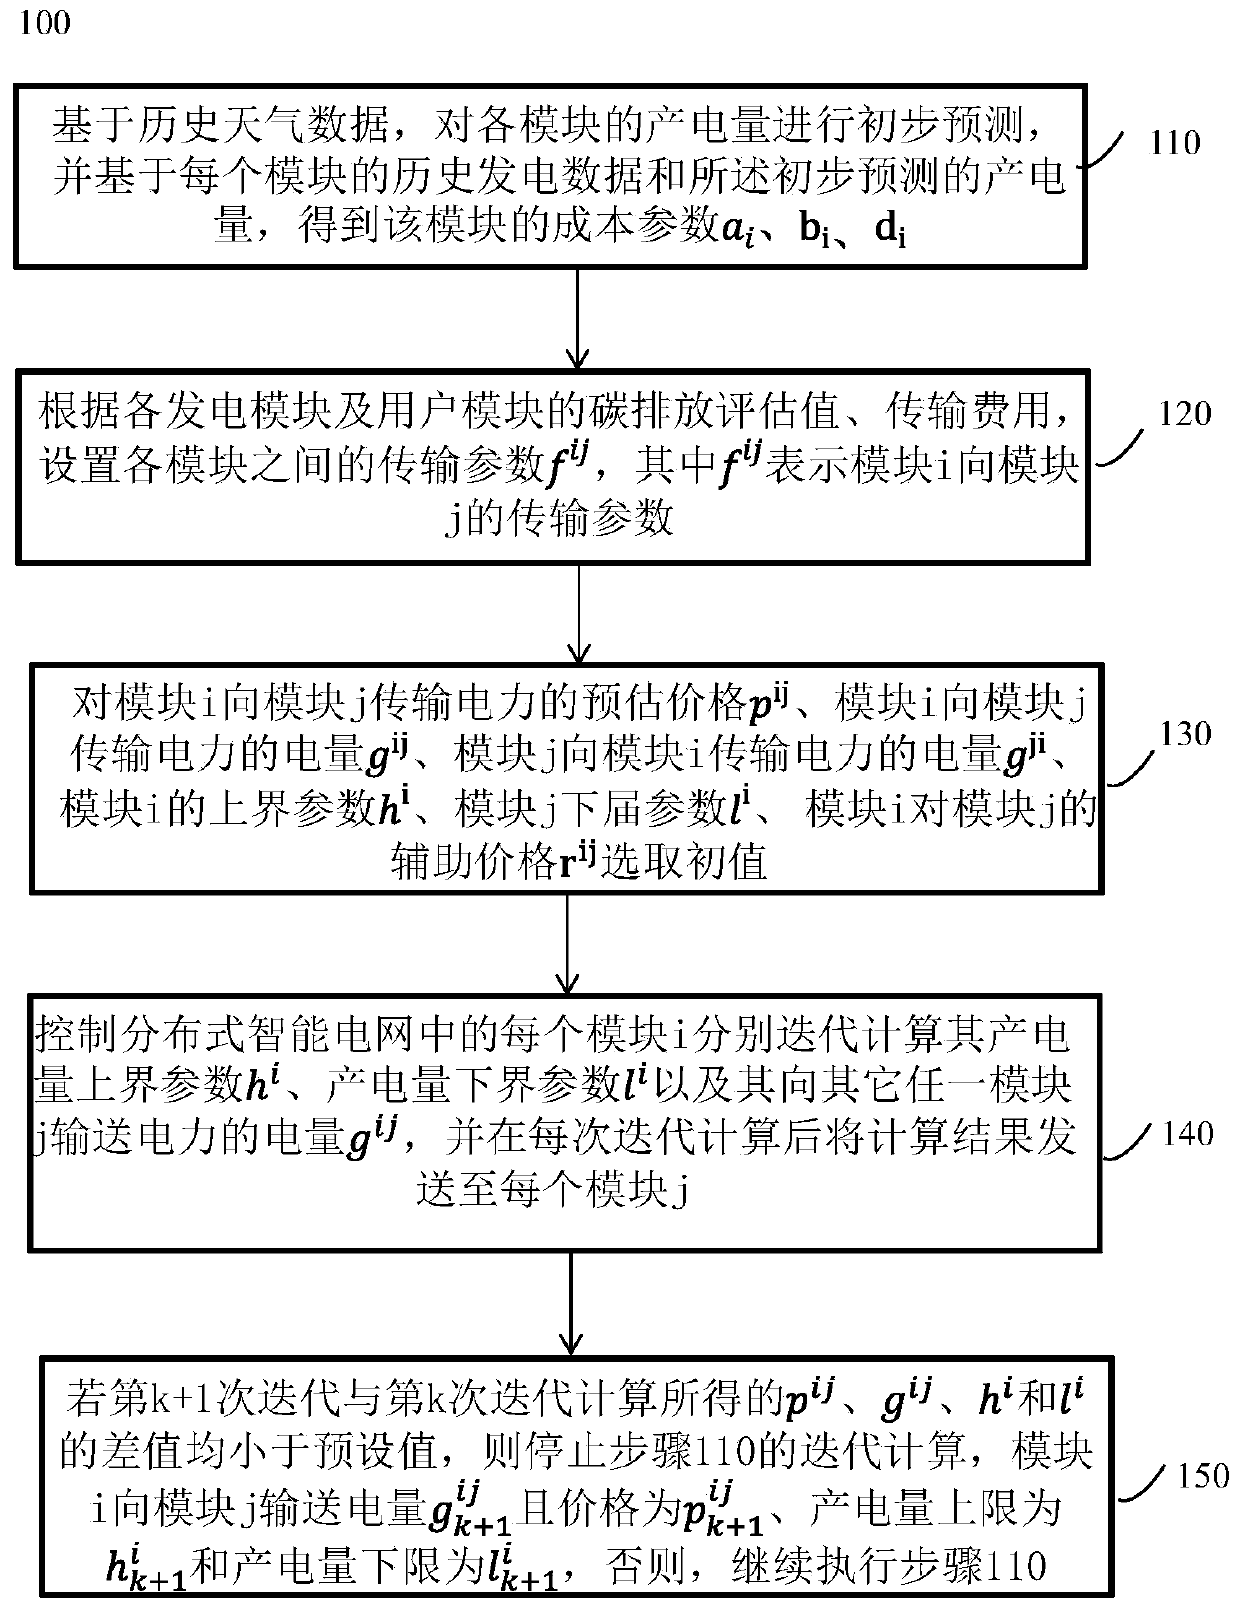 Control method of distributed intelligent power grid monitoring system based on prosumers